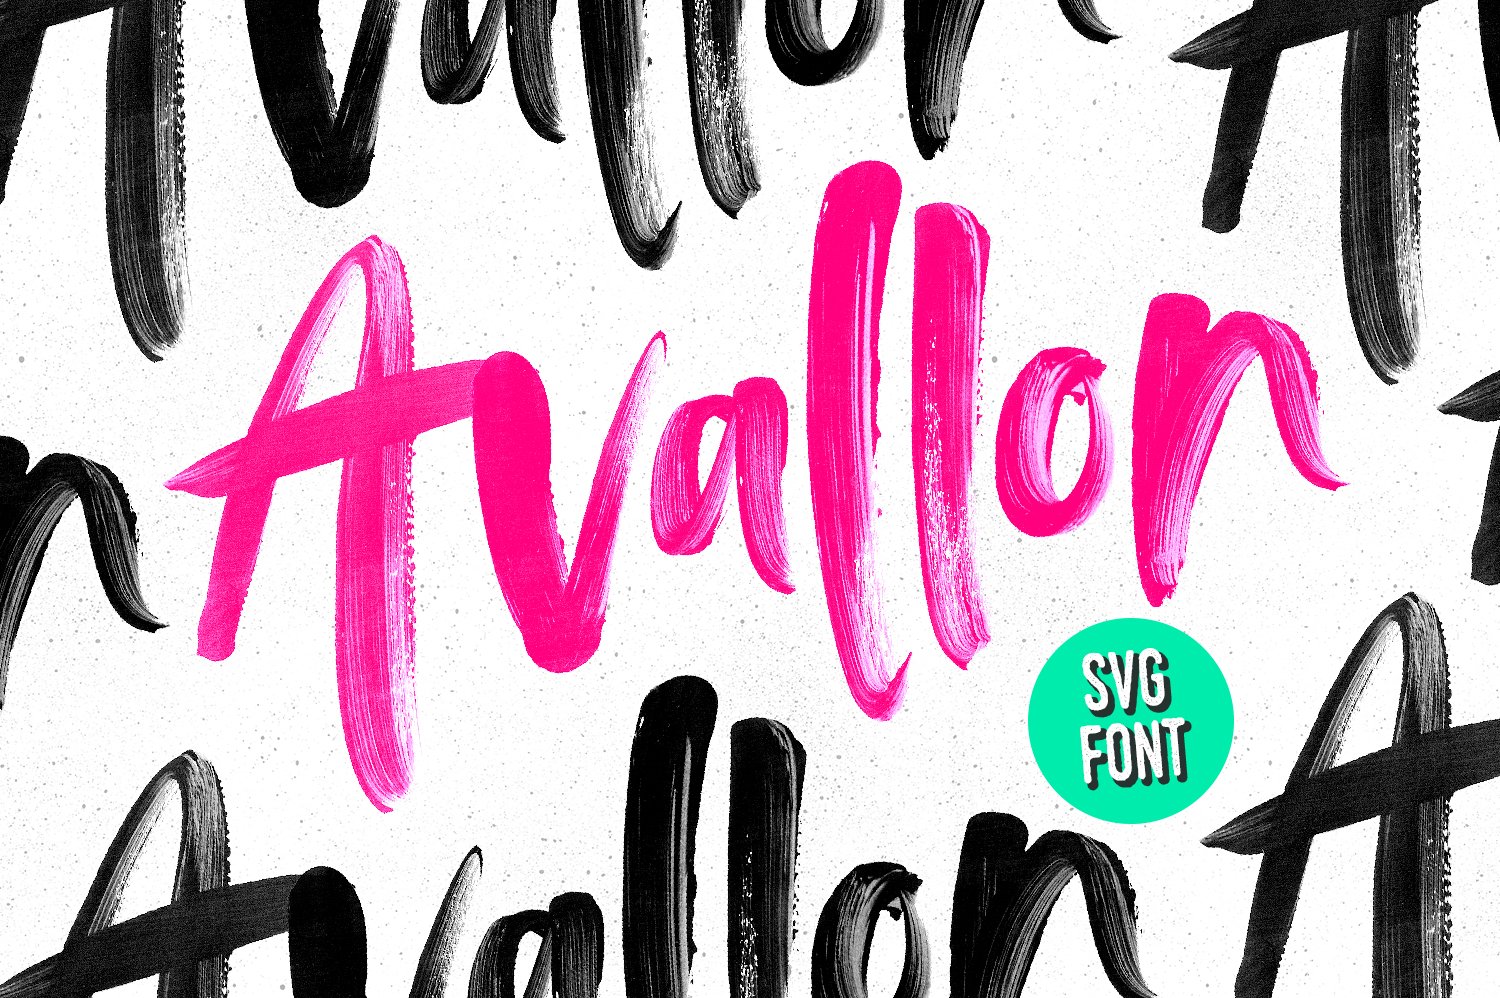 Avallon OpenType-SVG Font cover image.